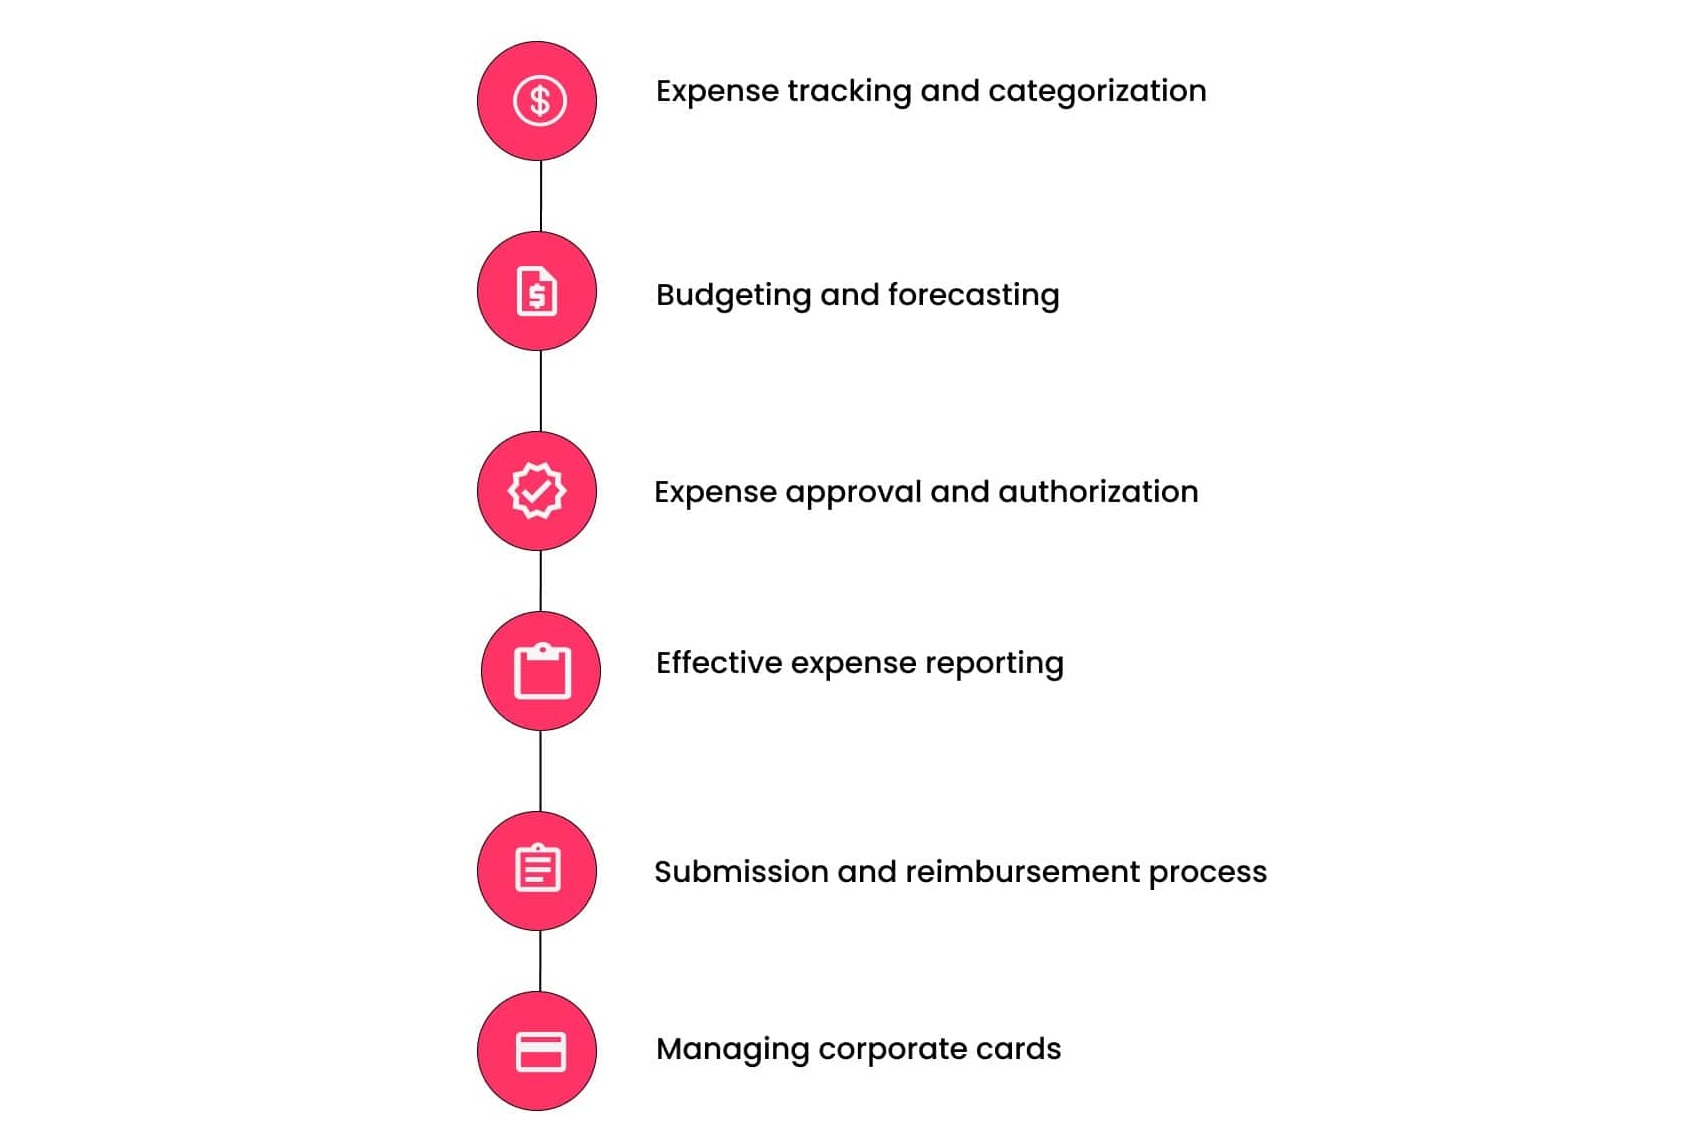 Components of expense management